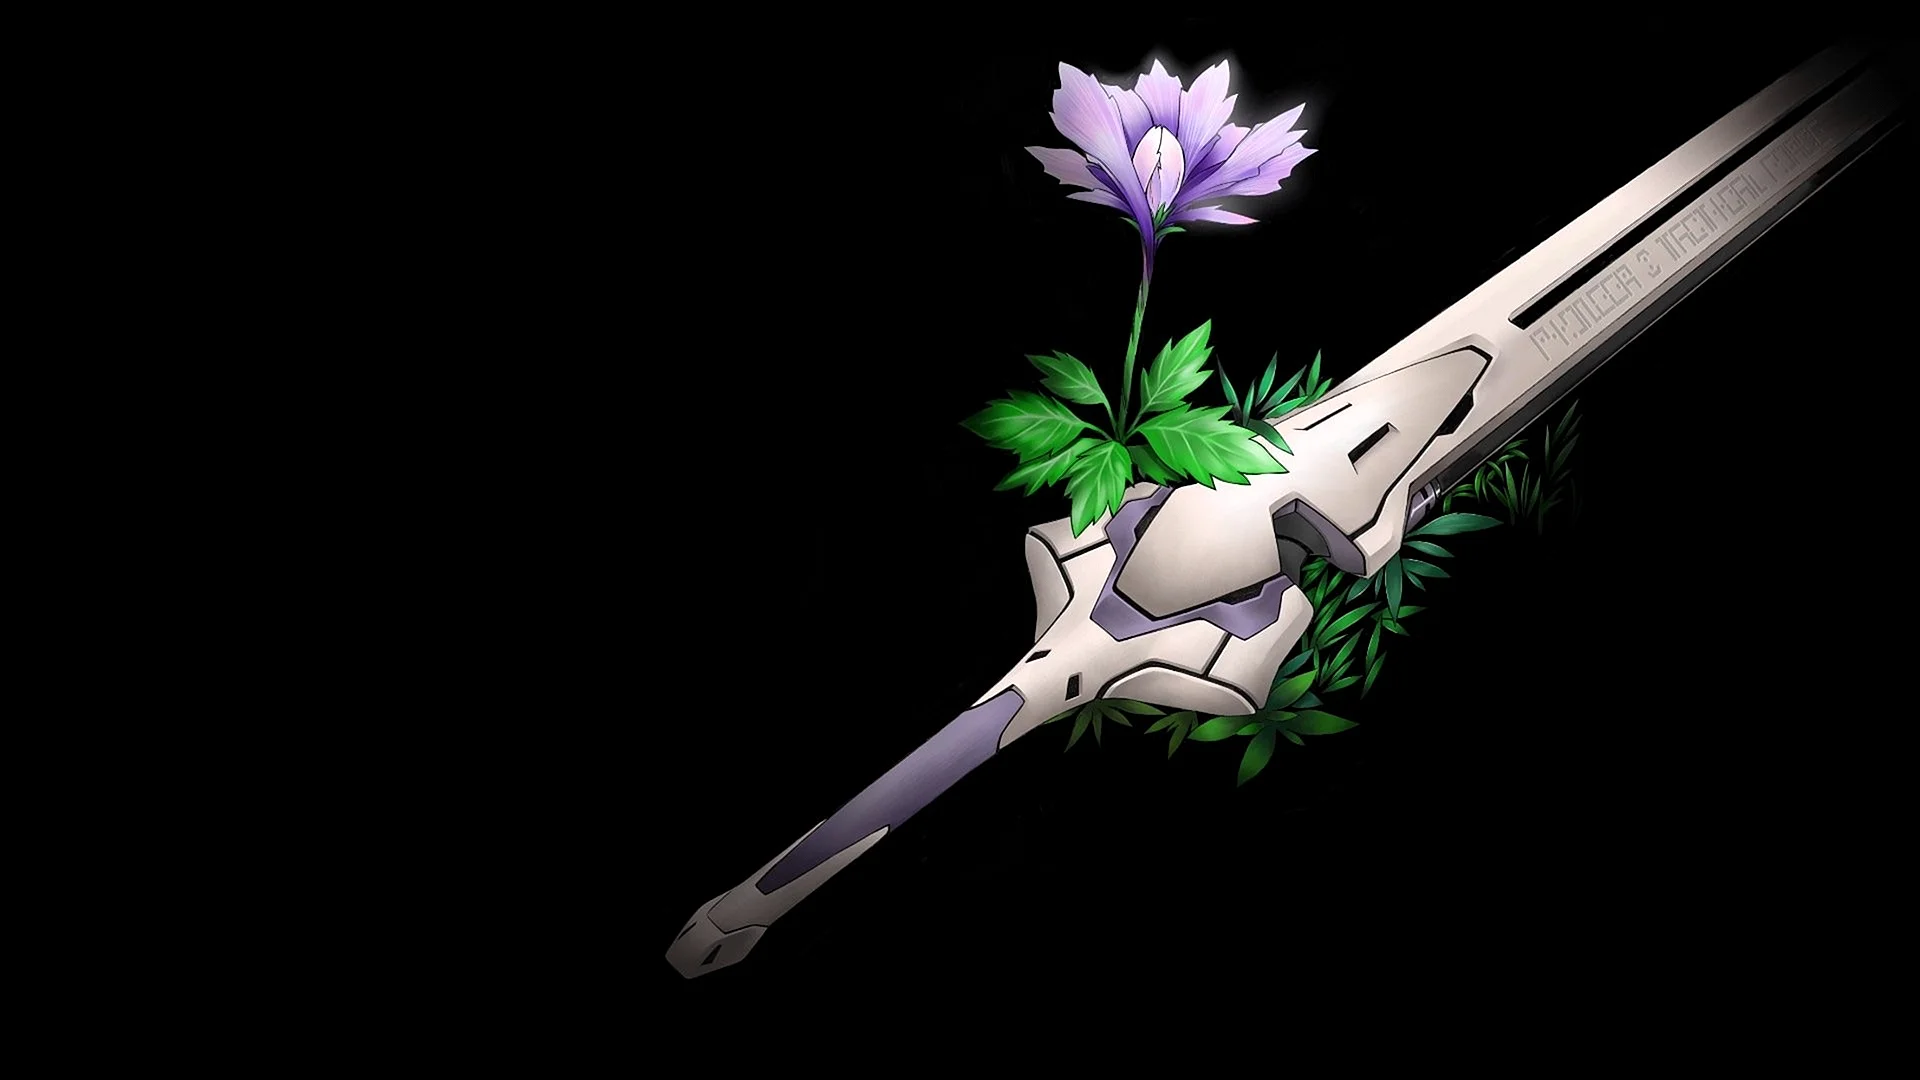 Sword and Flowers Wallpaper